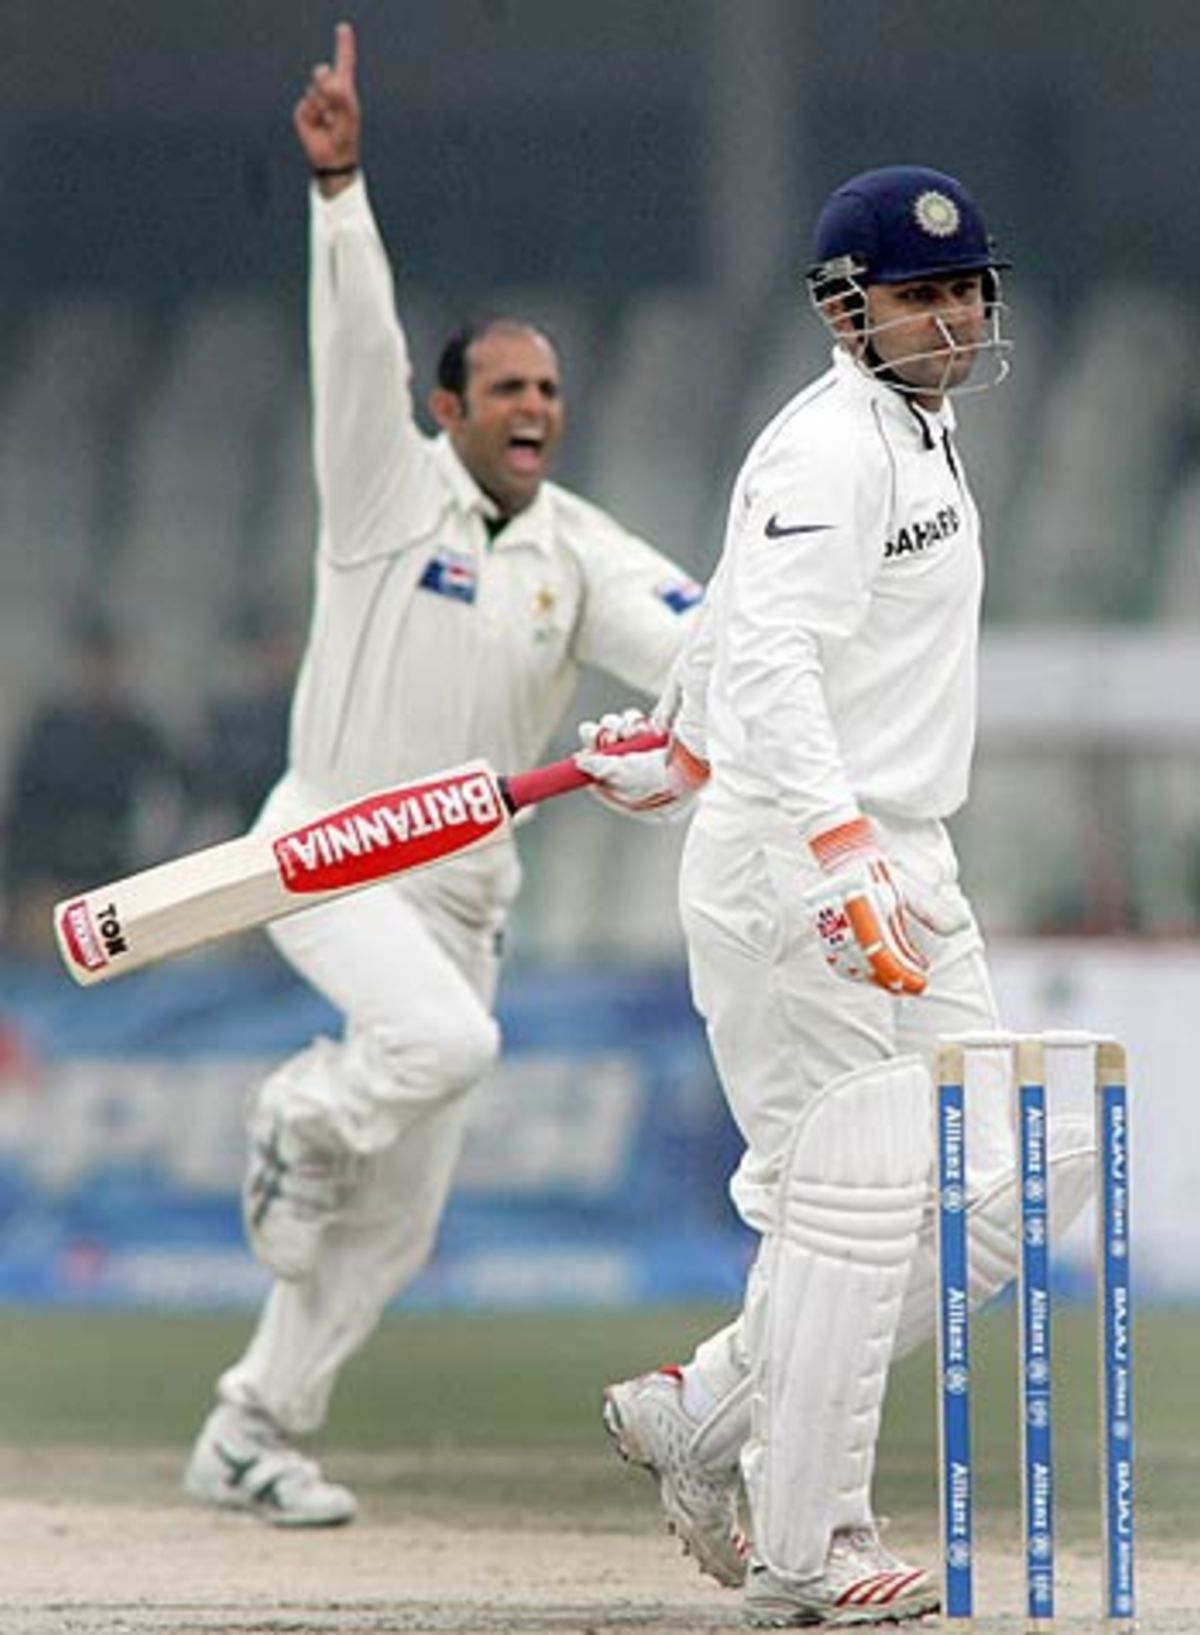 Naved-ul-Hasan dismissed Virender Sehwag just 4 runs short of a world record partnership, India in Pakistan, 1st Test, Lahore, January 17, 2006